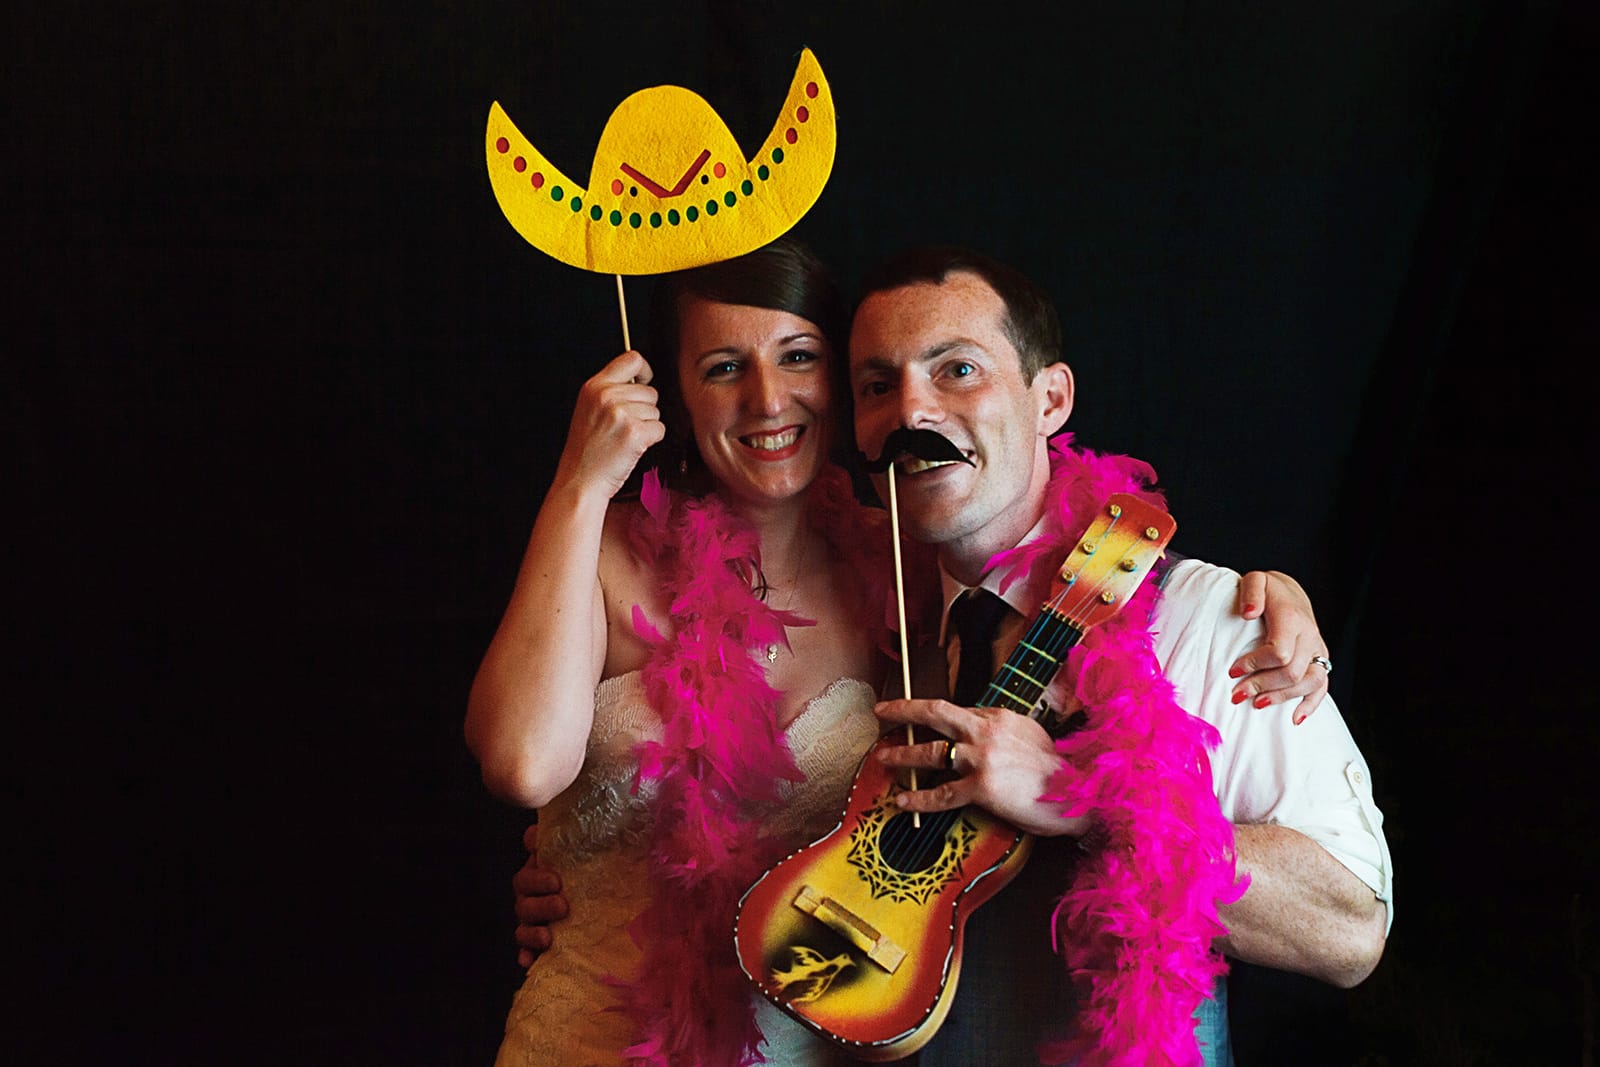 Bride and groom wear a feather boa, fake mustache and sombrero on the photo booth